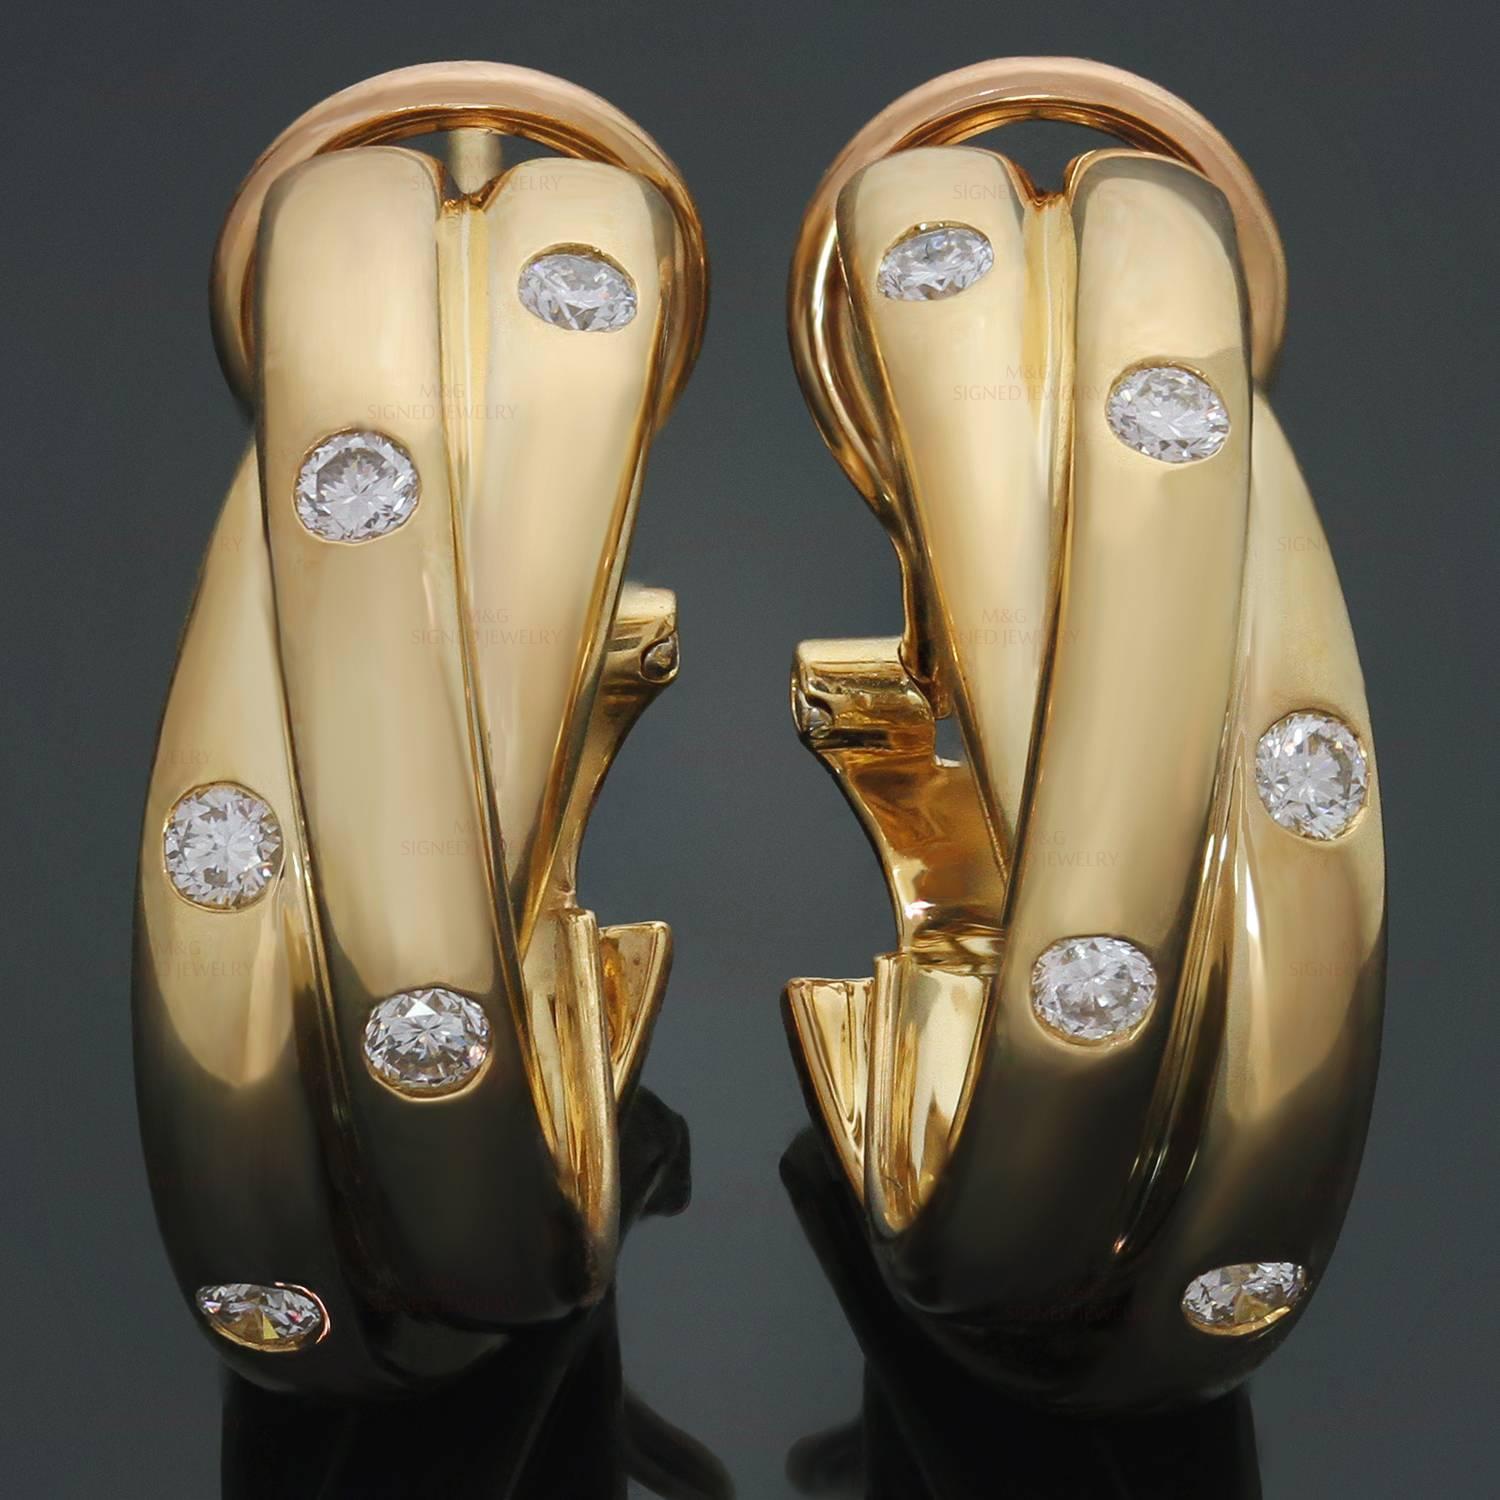 These fabulous earrings from Cartier's Trinity collection feature the classic twisted cable design crafted in 18k yellow gold and bezel-set with brilliant-cut round diamonds. Made in France circa 1990s. Iconic and timeless. Measurements: 0.23"